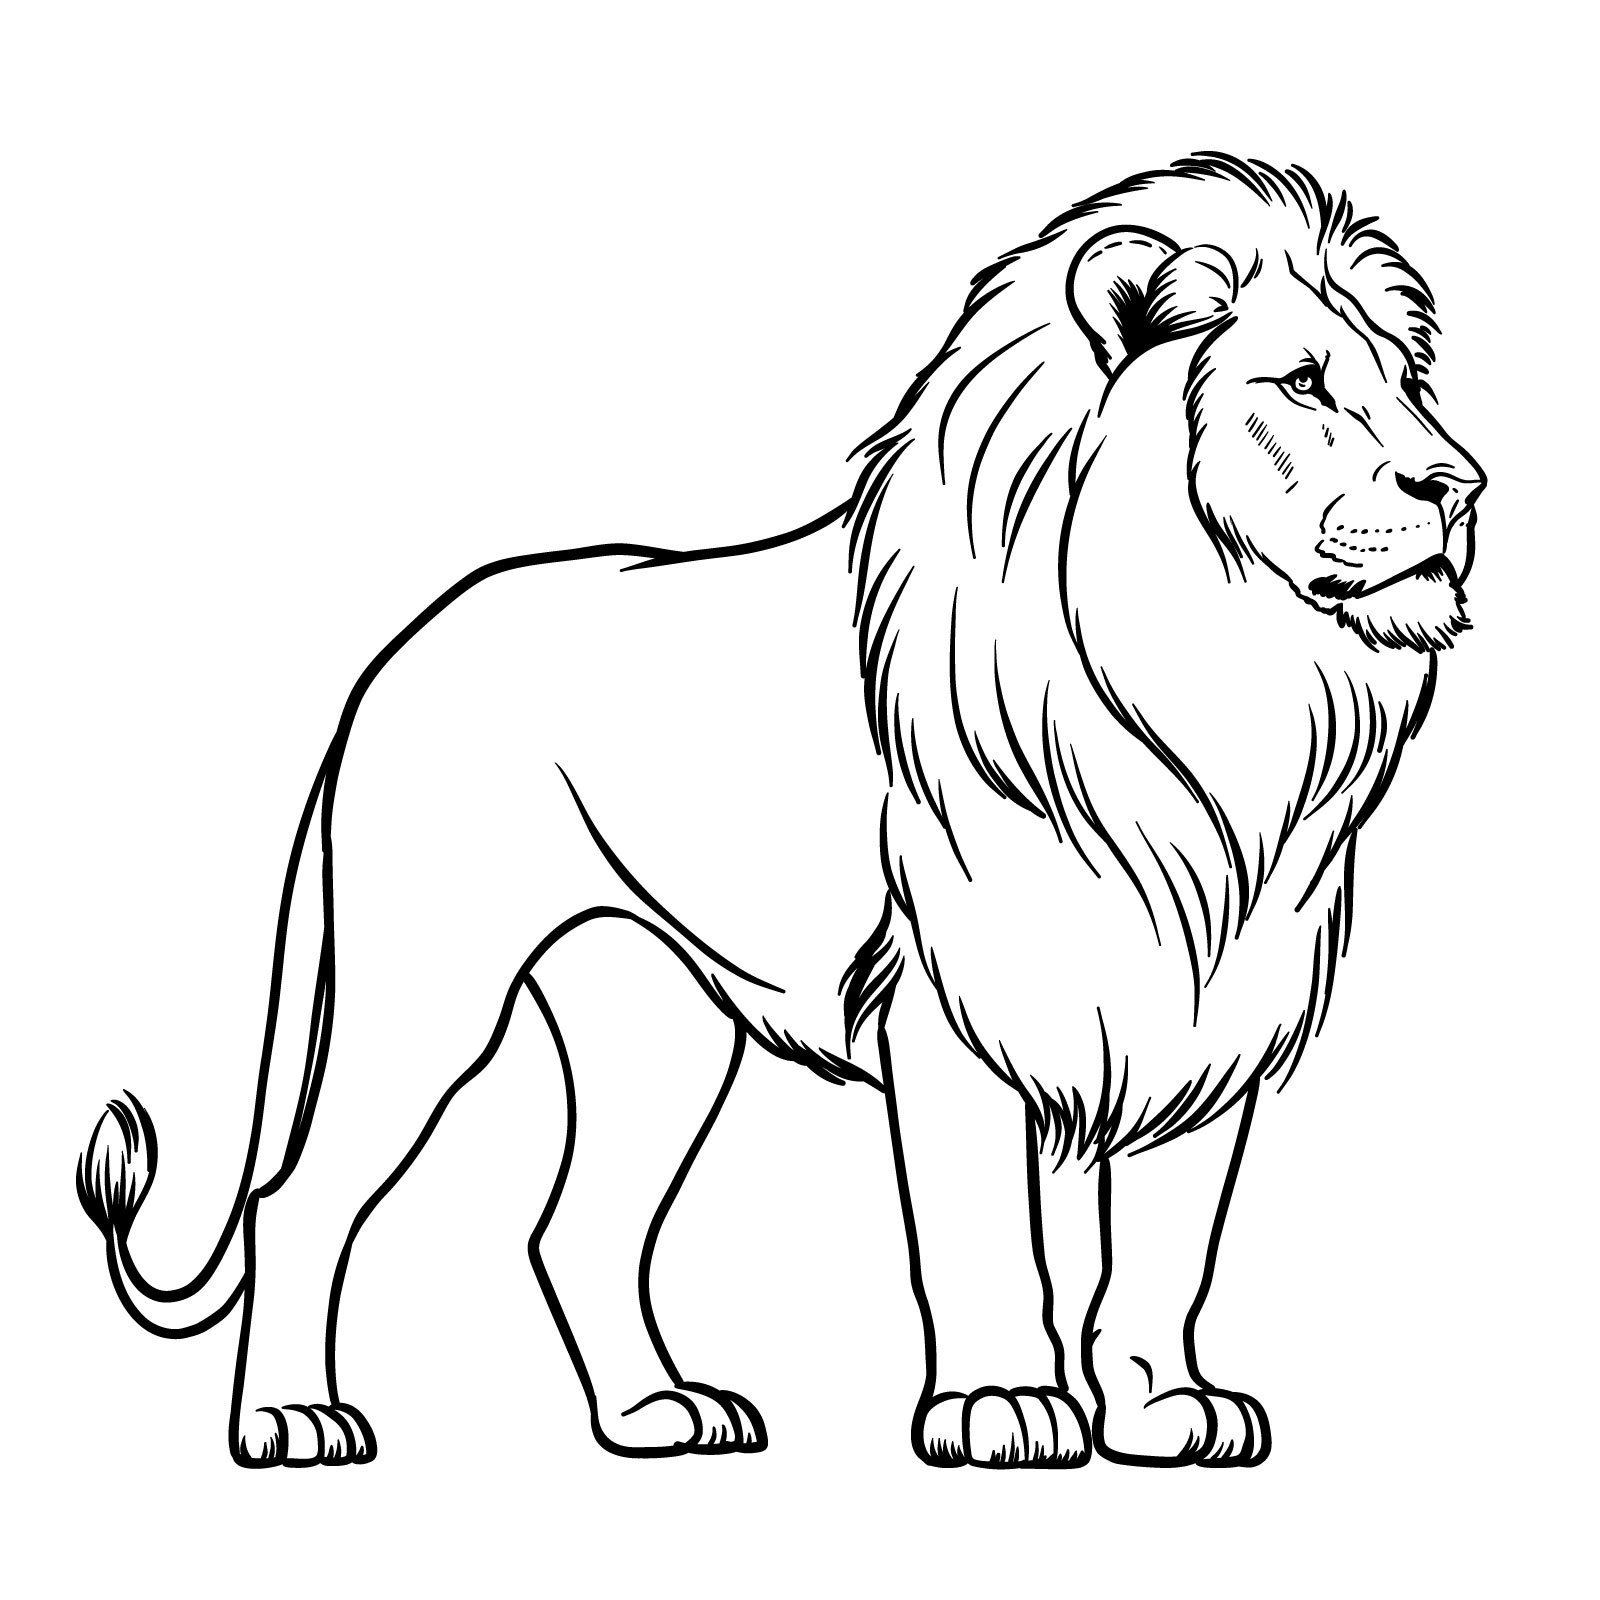 Standing lion easy drawing - 3/4 view and standing